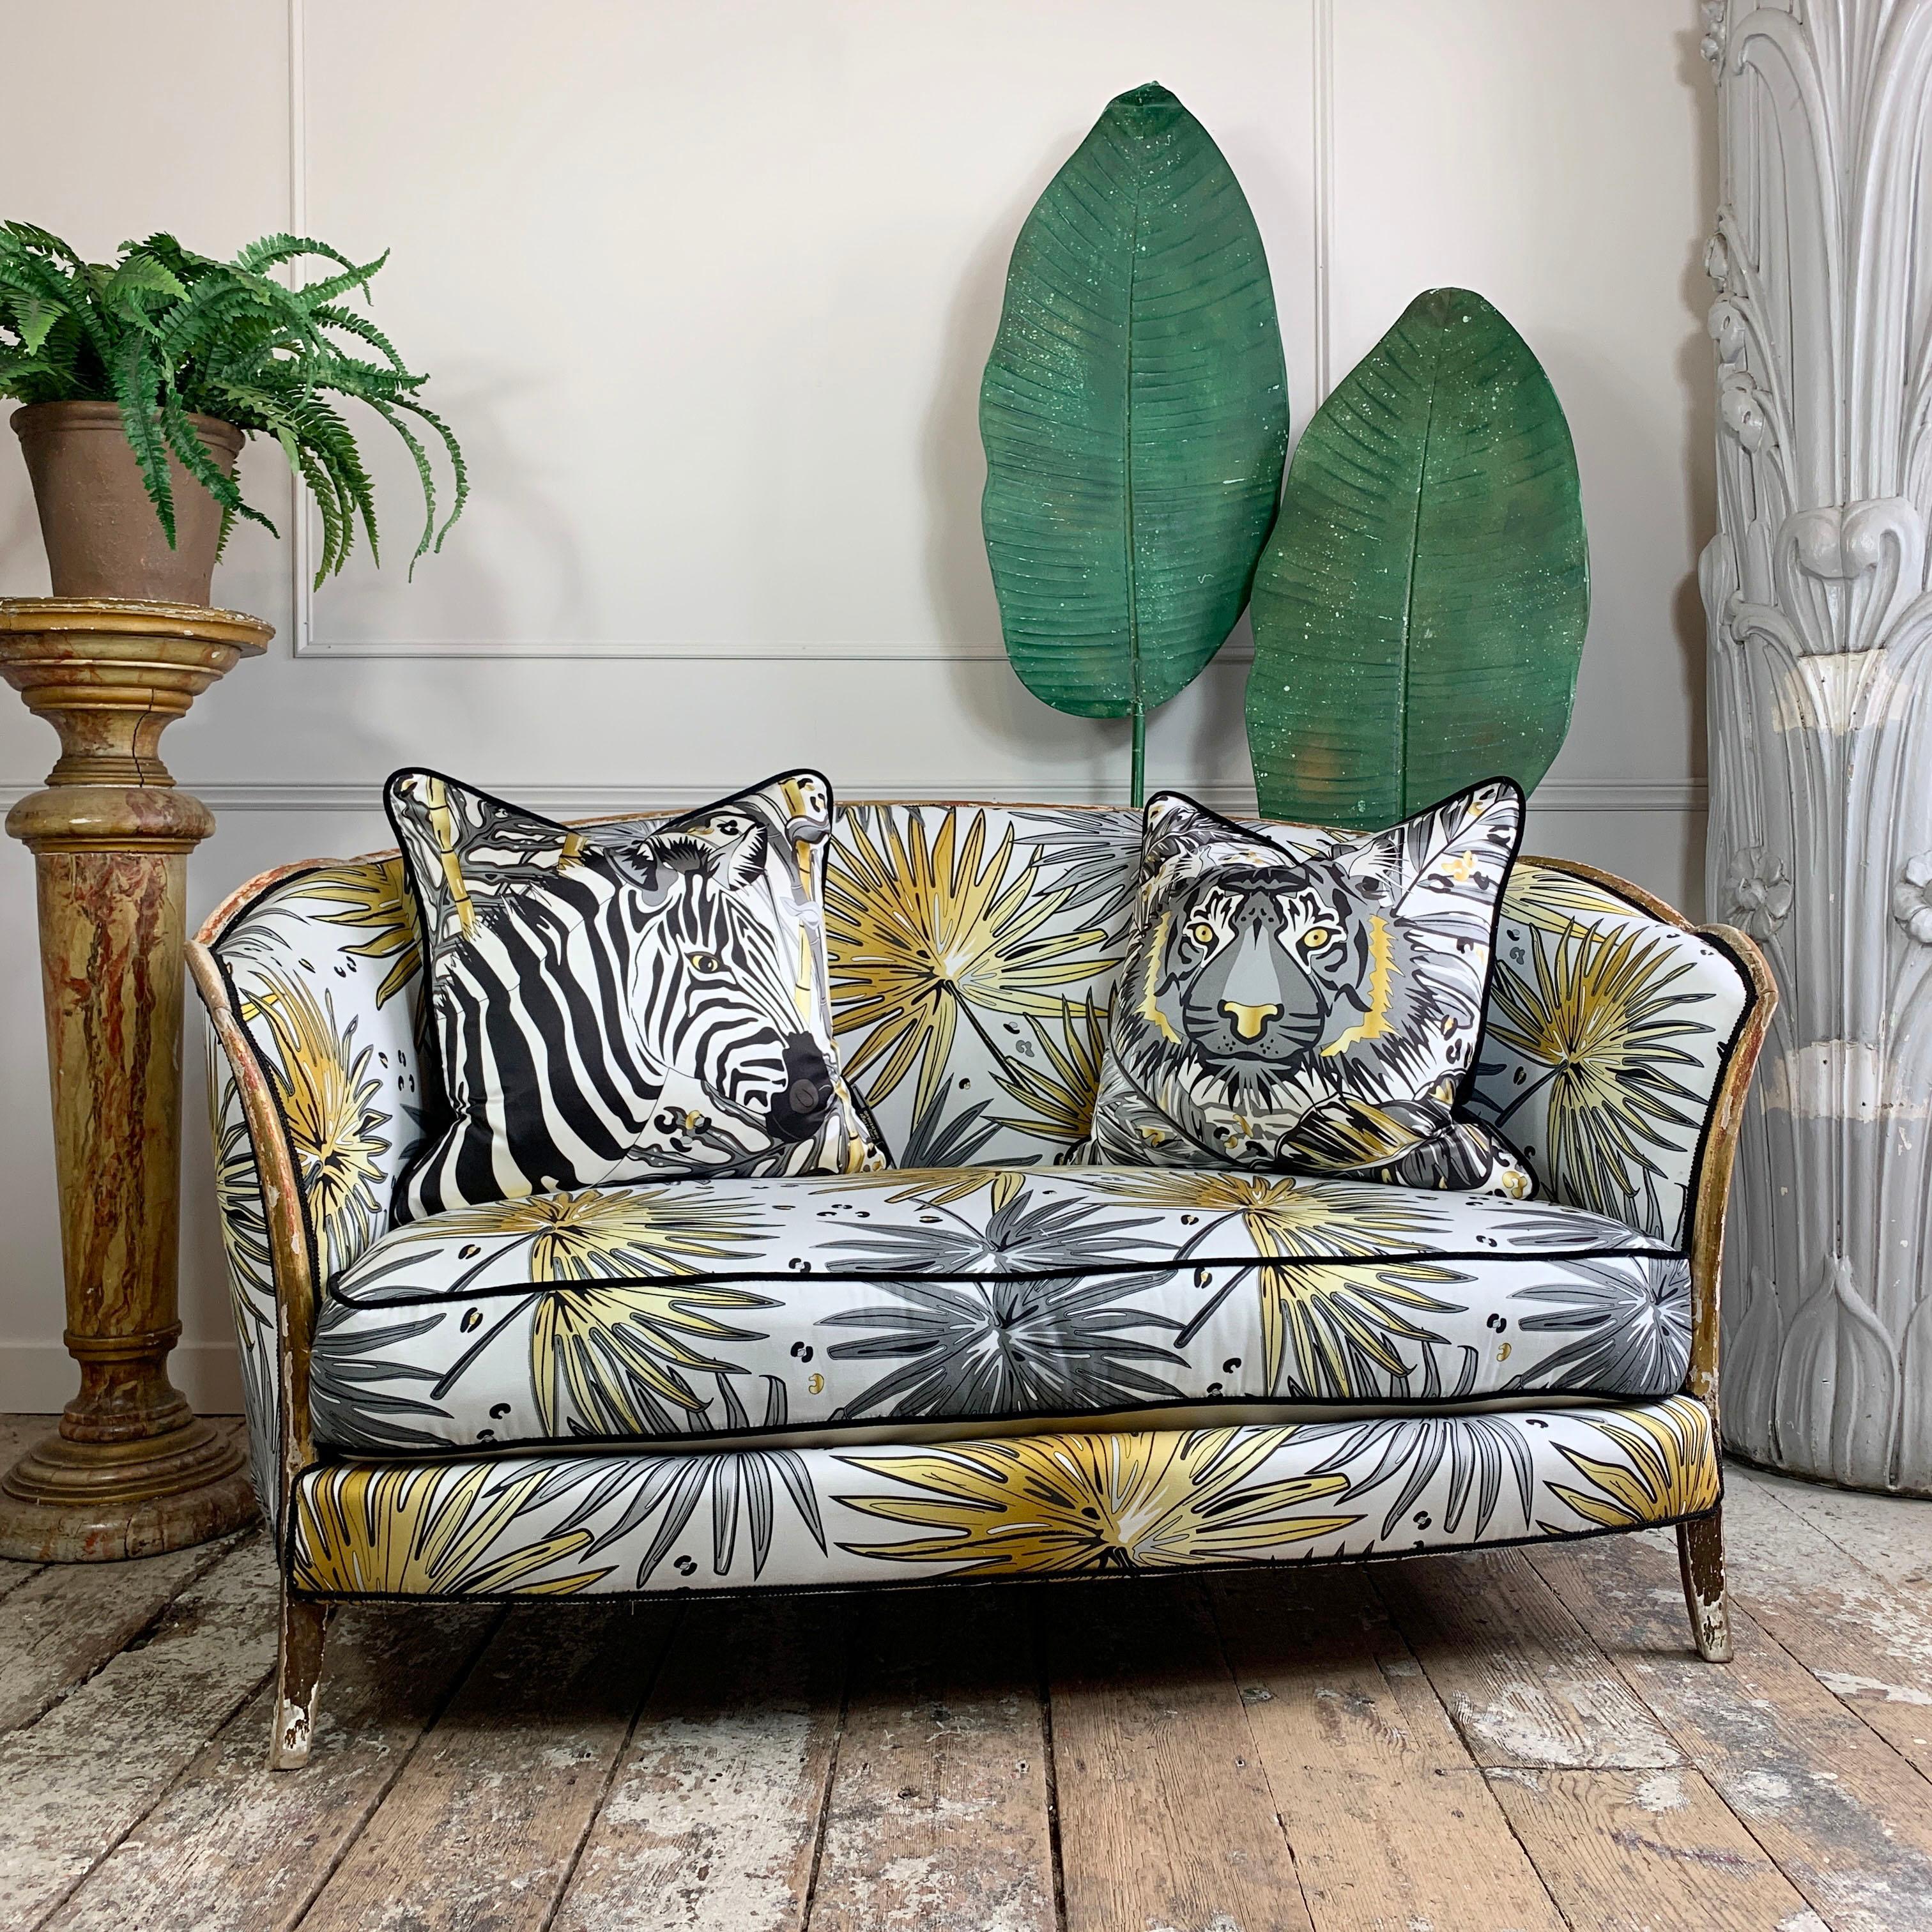 Antique French Parlour Settee in Tropics 'Fan Palm' Fabric For Sale 1